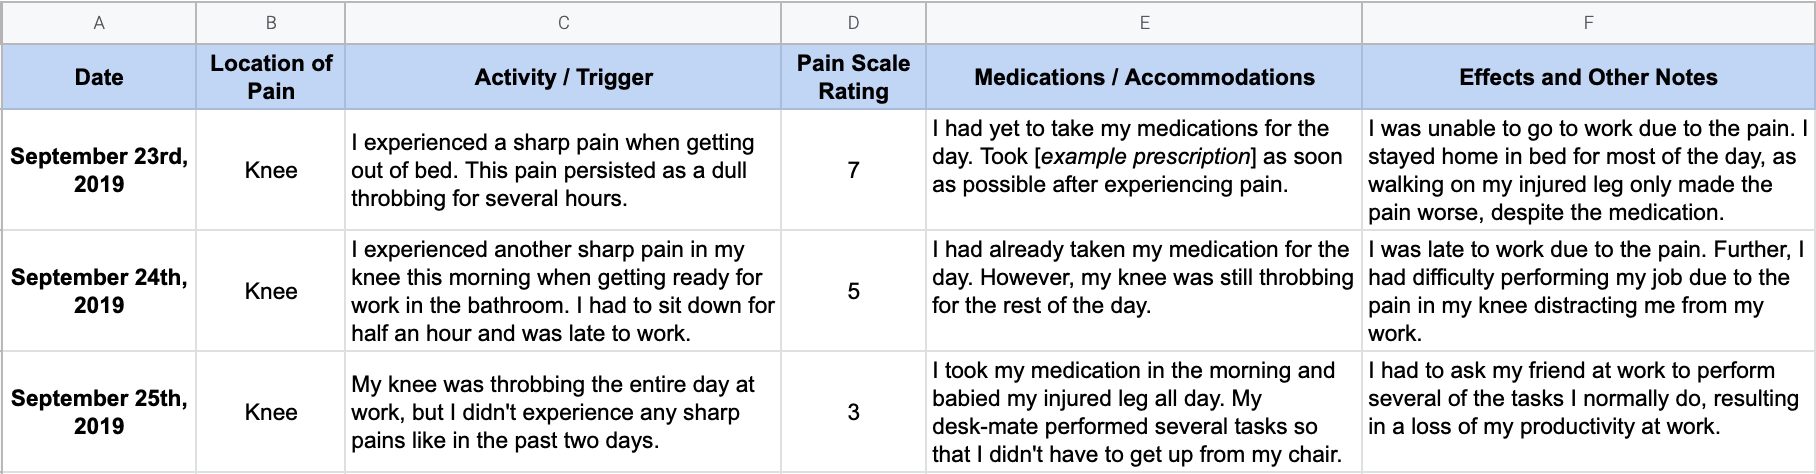 an example of a very basic pain journal for a knee injury. the image shows a spreadsheet with entries for various instances of injury flare-up as a way of showing what a full pain journal should look like.